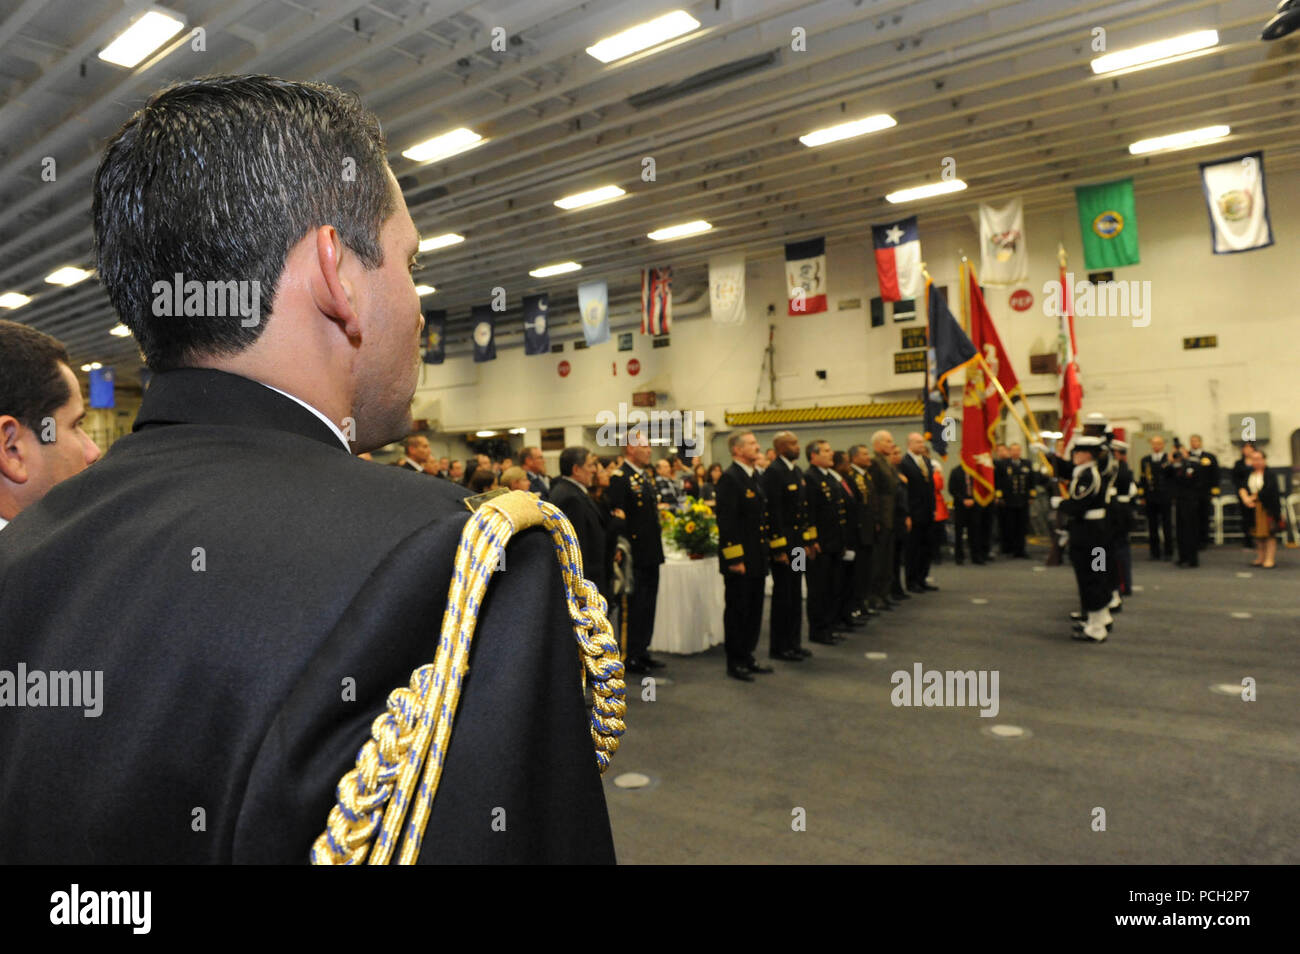 A Peruvian naval officer stands at attention during a reception on the amphibious assault ship USS America (LHA 6) in Callao, Peru, Sept. 1, 2014. The America embarked on a mission to conduct training engagements with partner nations throughout the Americas before reporting to its new home port of San Diego. The America was set to be ceremoniously commissioned Oct. 11, 2014. Stock Photo